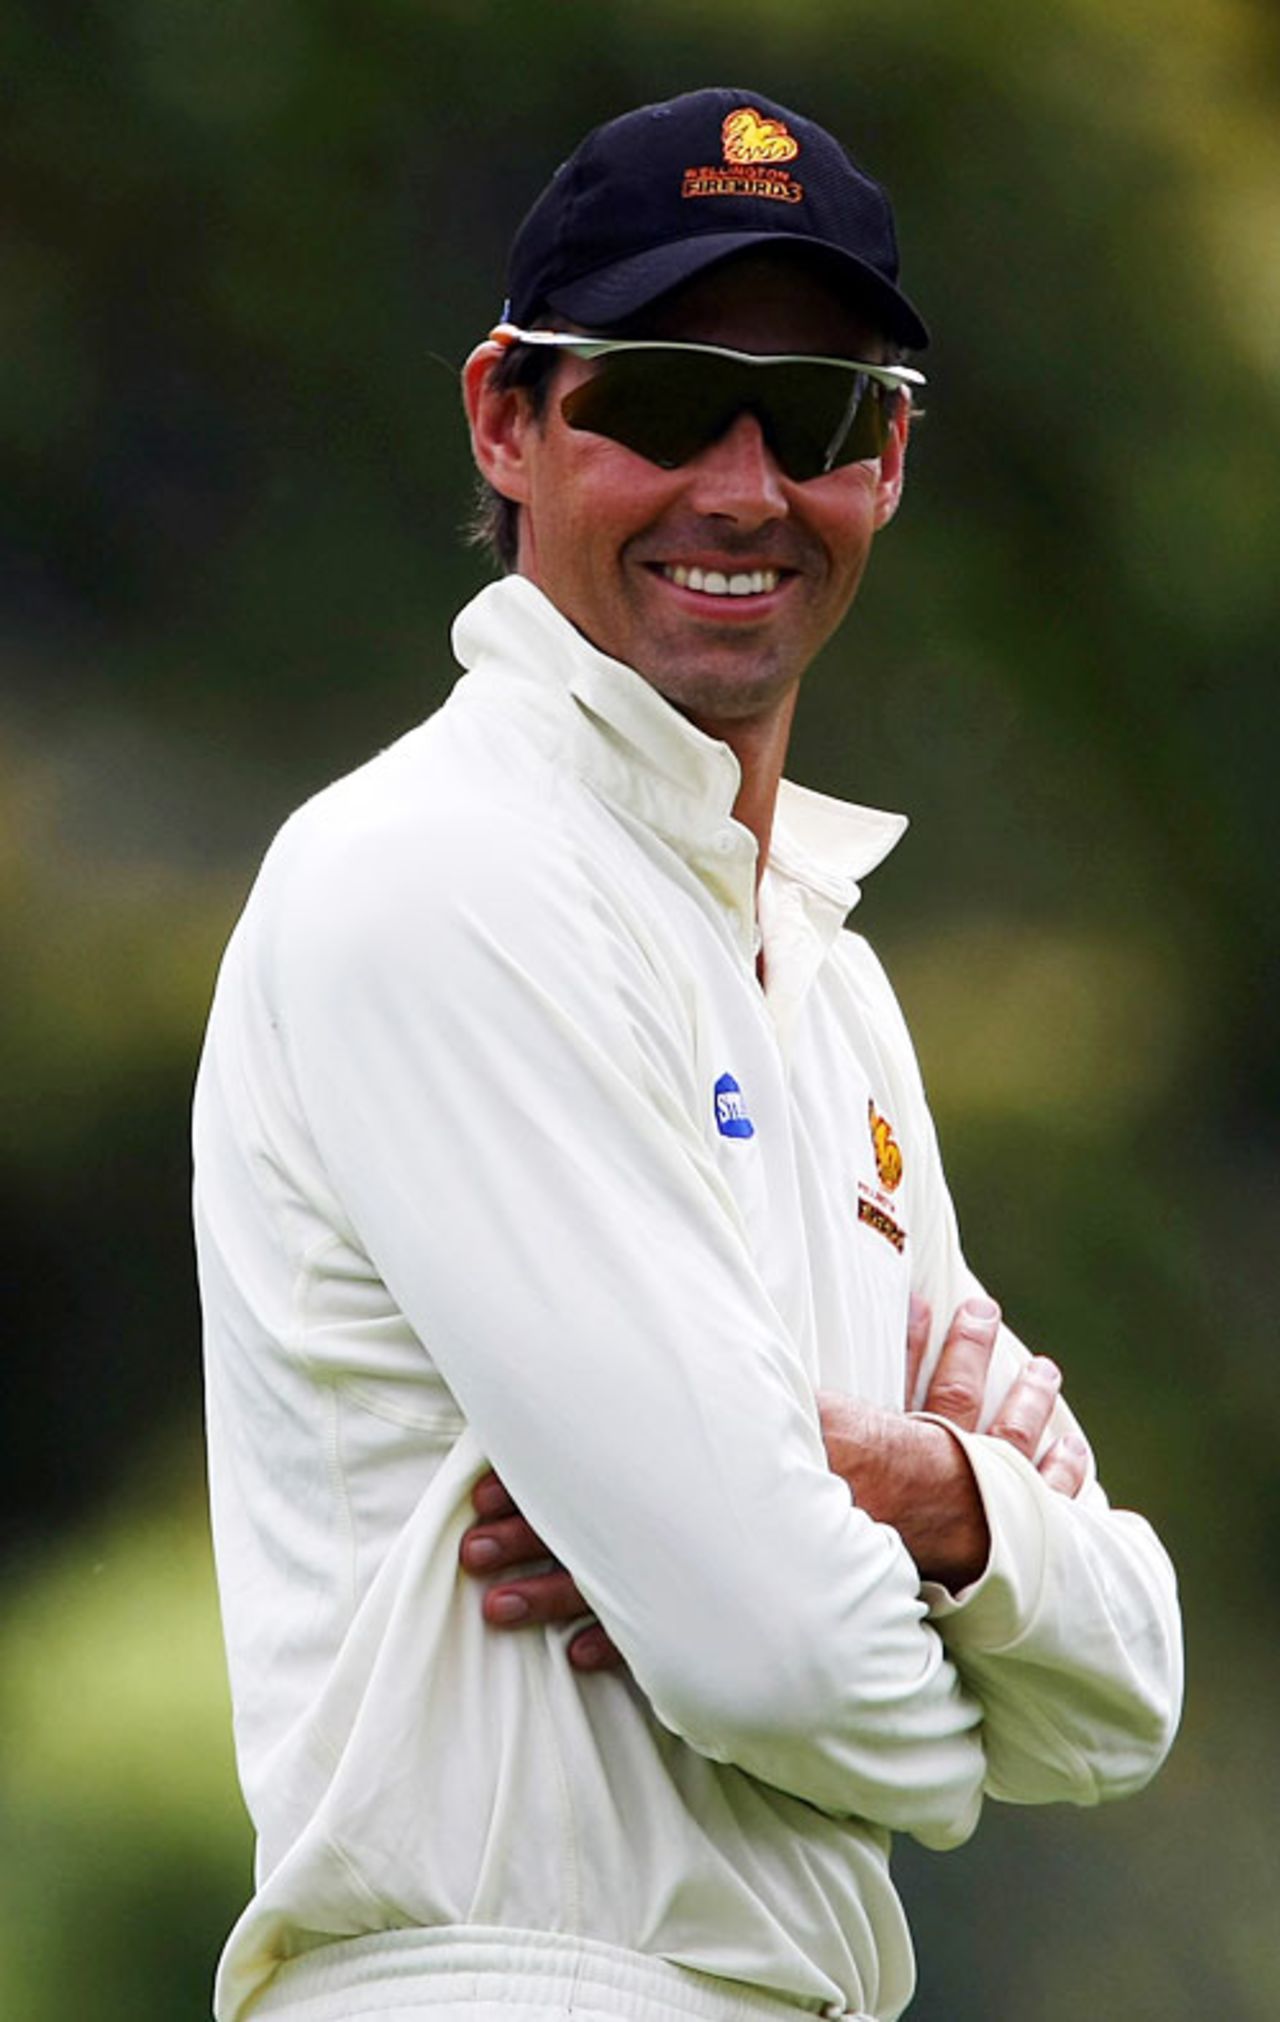 A relaxed Stephen Fleming in the field, NZ Invitational XI v England XI, Dunedin, February 25, 2008